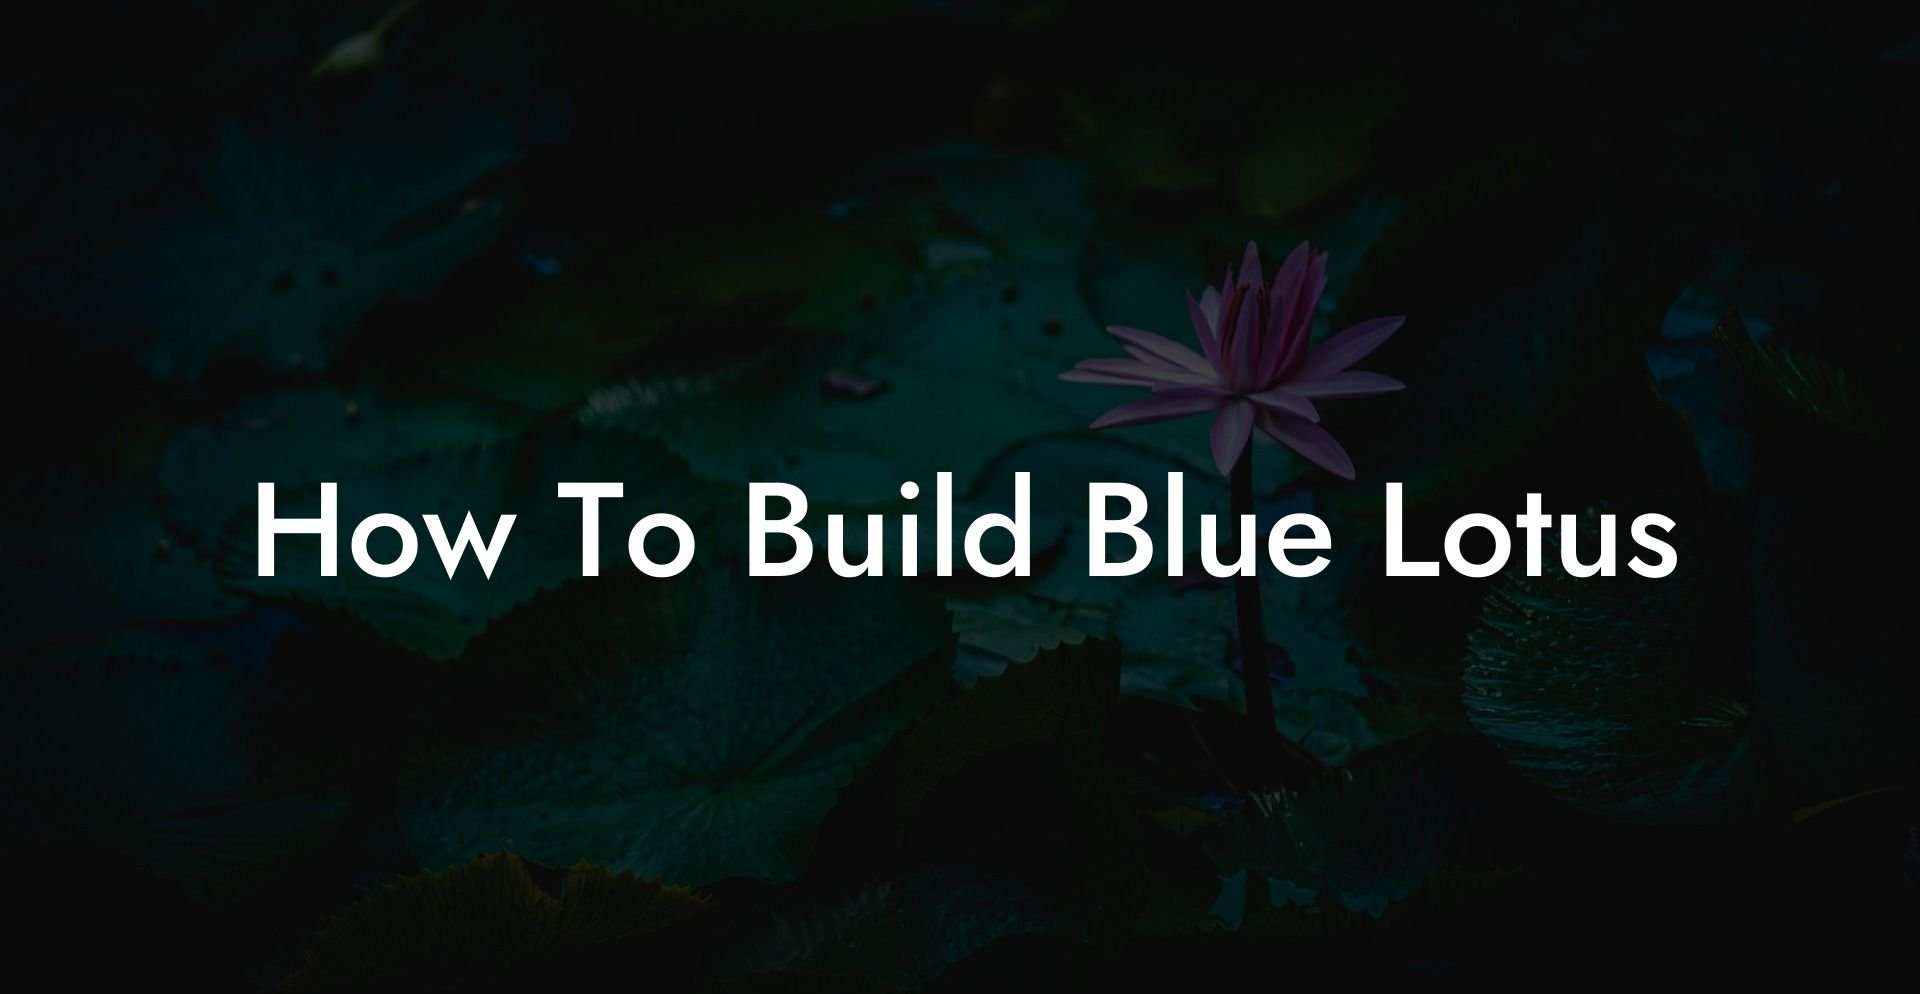 How To Build Blue Lotus